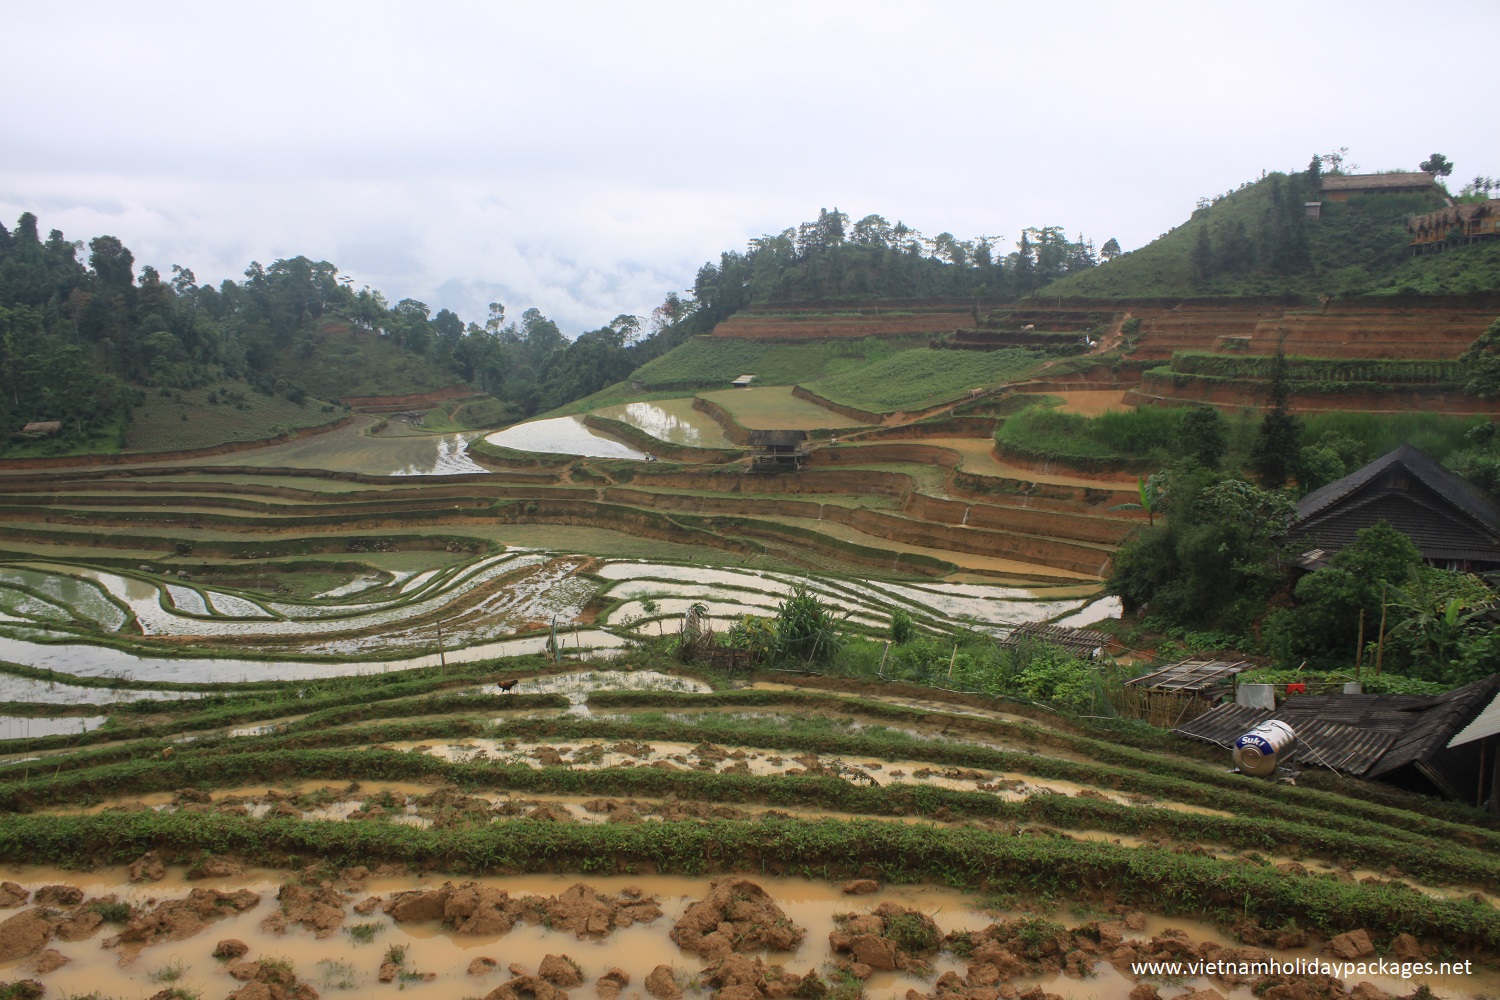 Holiday in Ha Giang - Ha Giang Tours